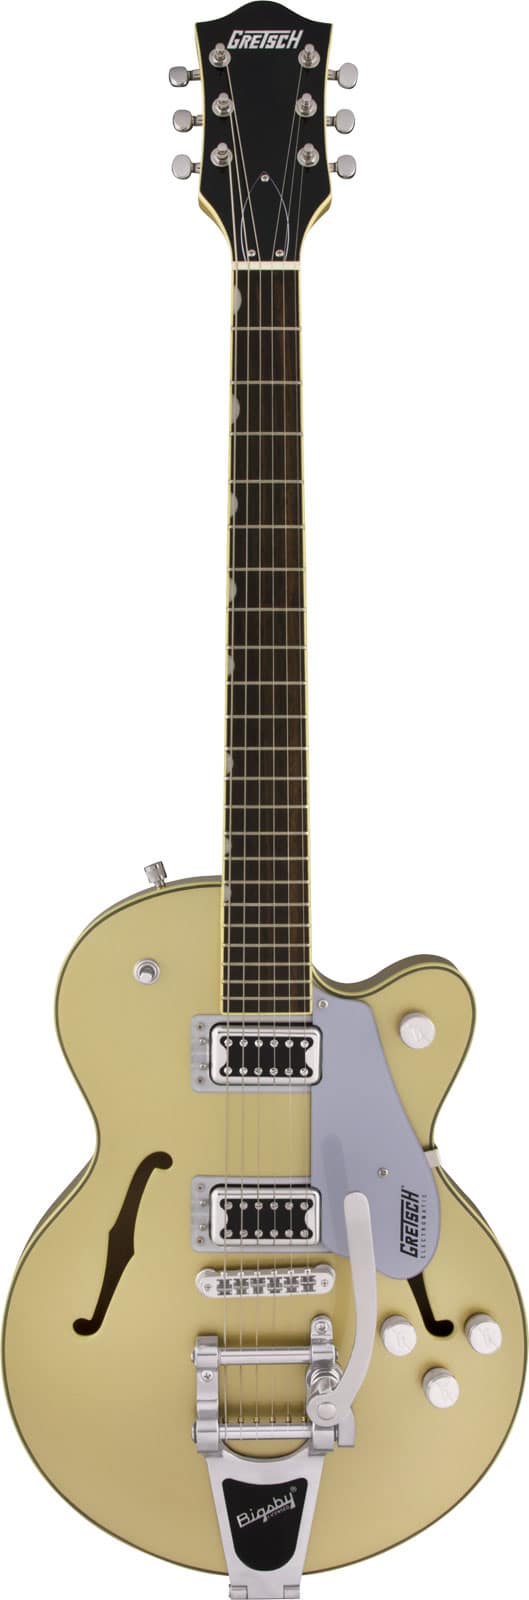 GRETSCH GUITARS G5655T ELECTROMATIC CENTER BLOCK JR. SINGLE-CUT WITH BIGSBY, CASINO GOLD